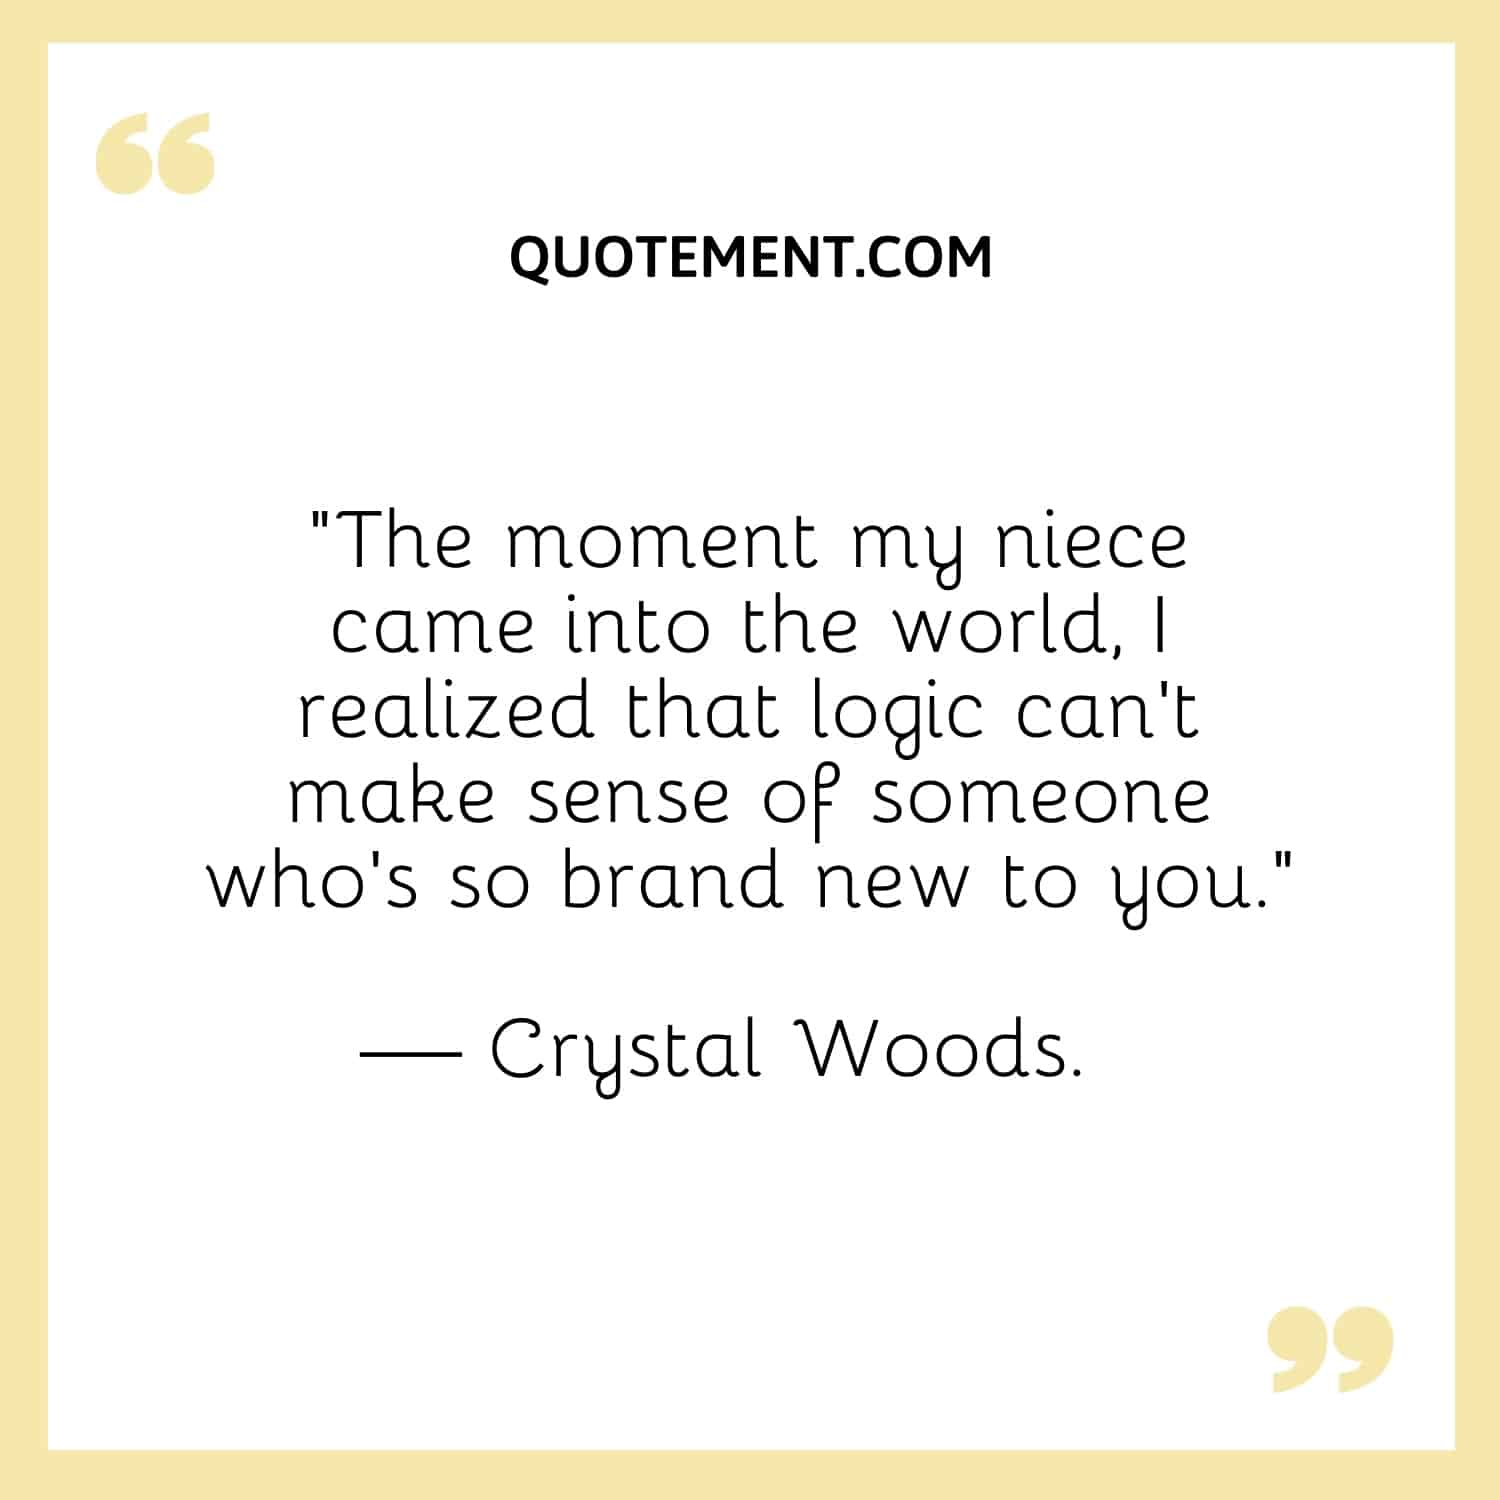 “The moment my niece came into the world, I realized that logic can’t make sense of someone who’s so brand new to you.” — Crystal Woods